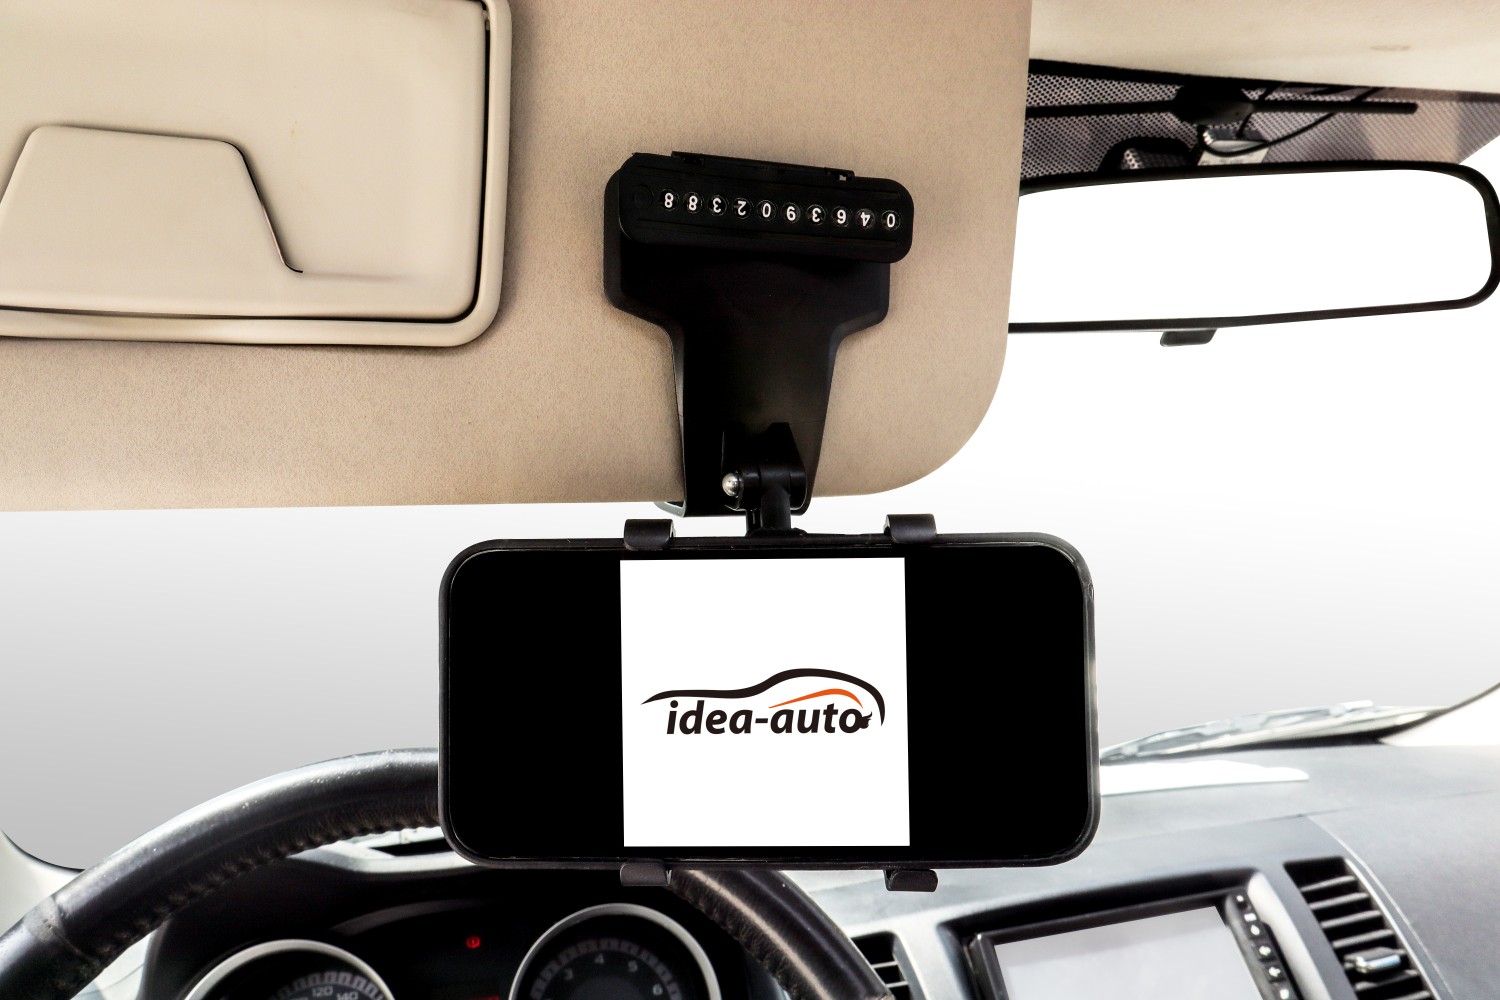 【idea-auto】Smart phone holder with Parking Number